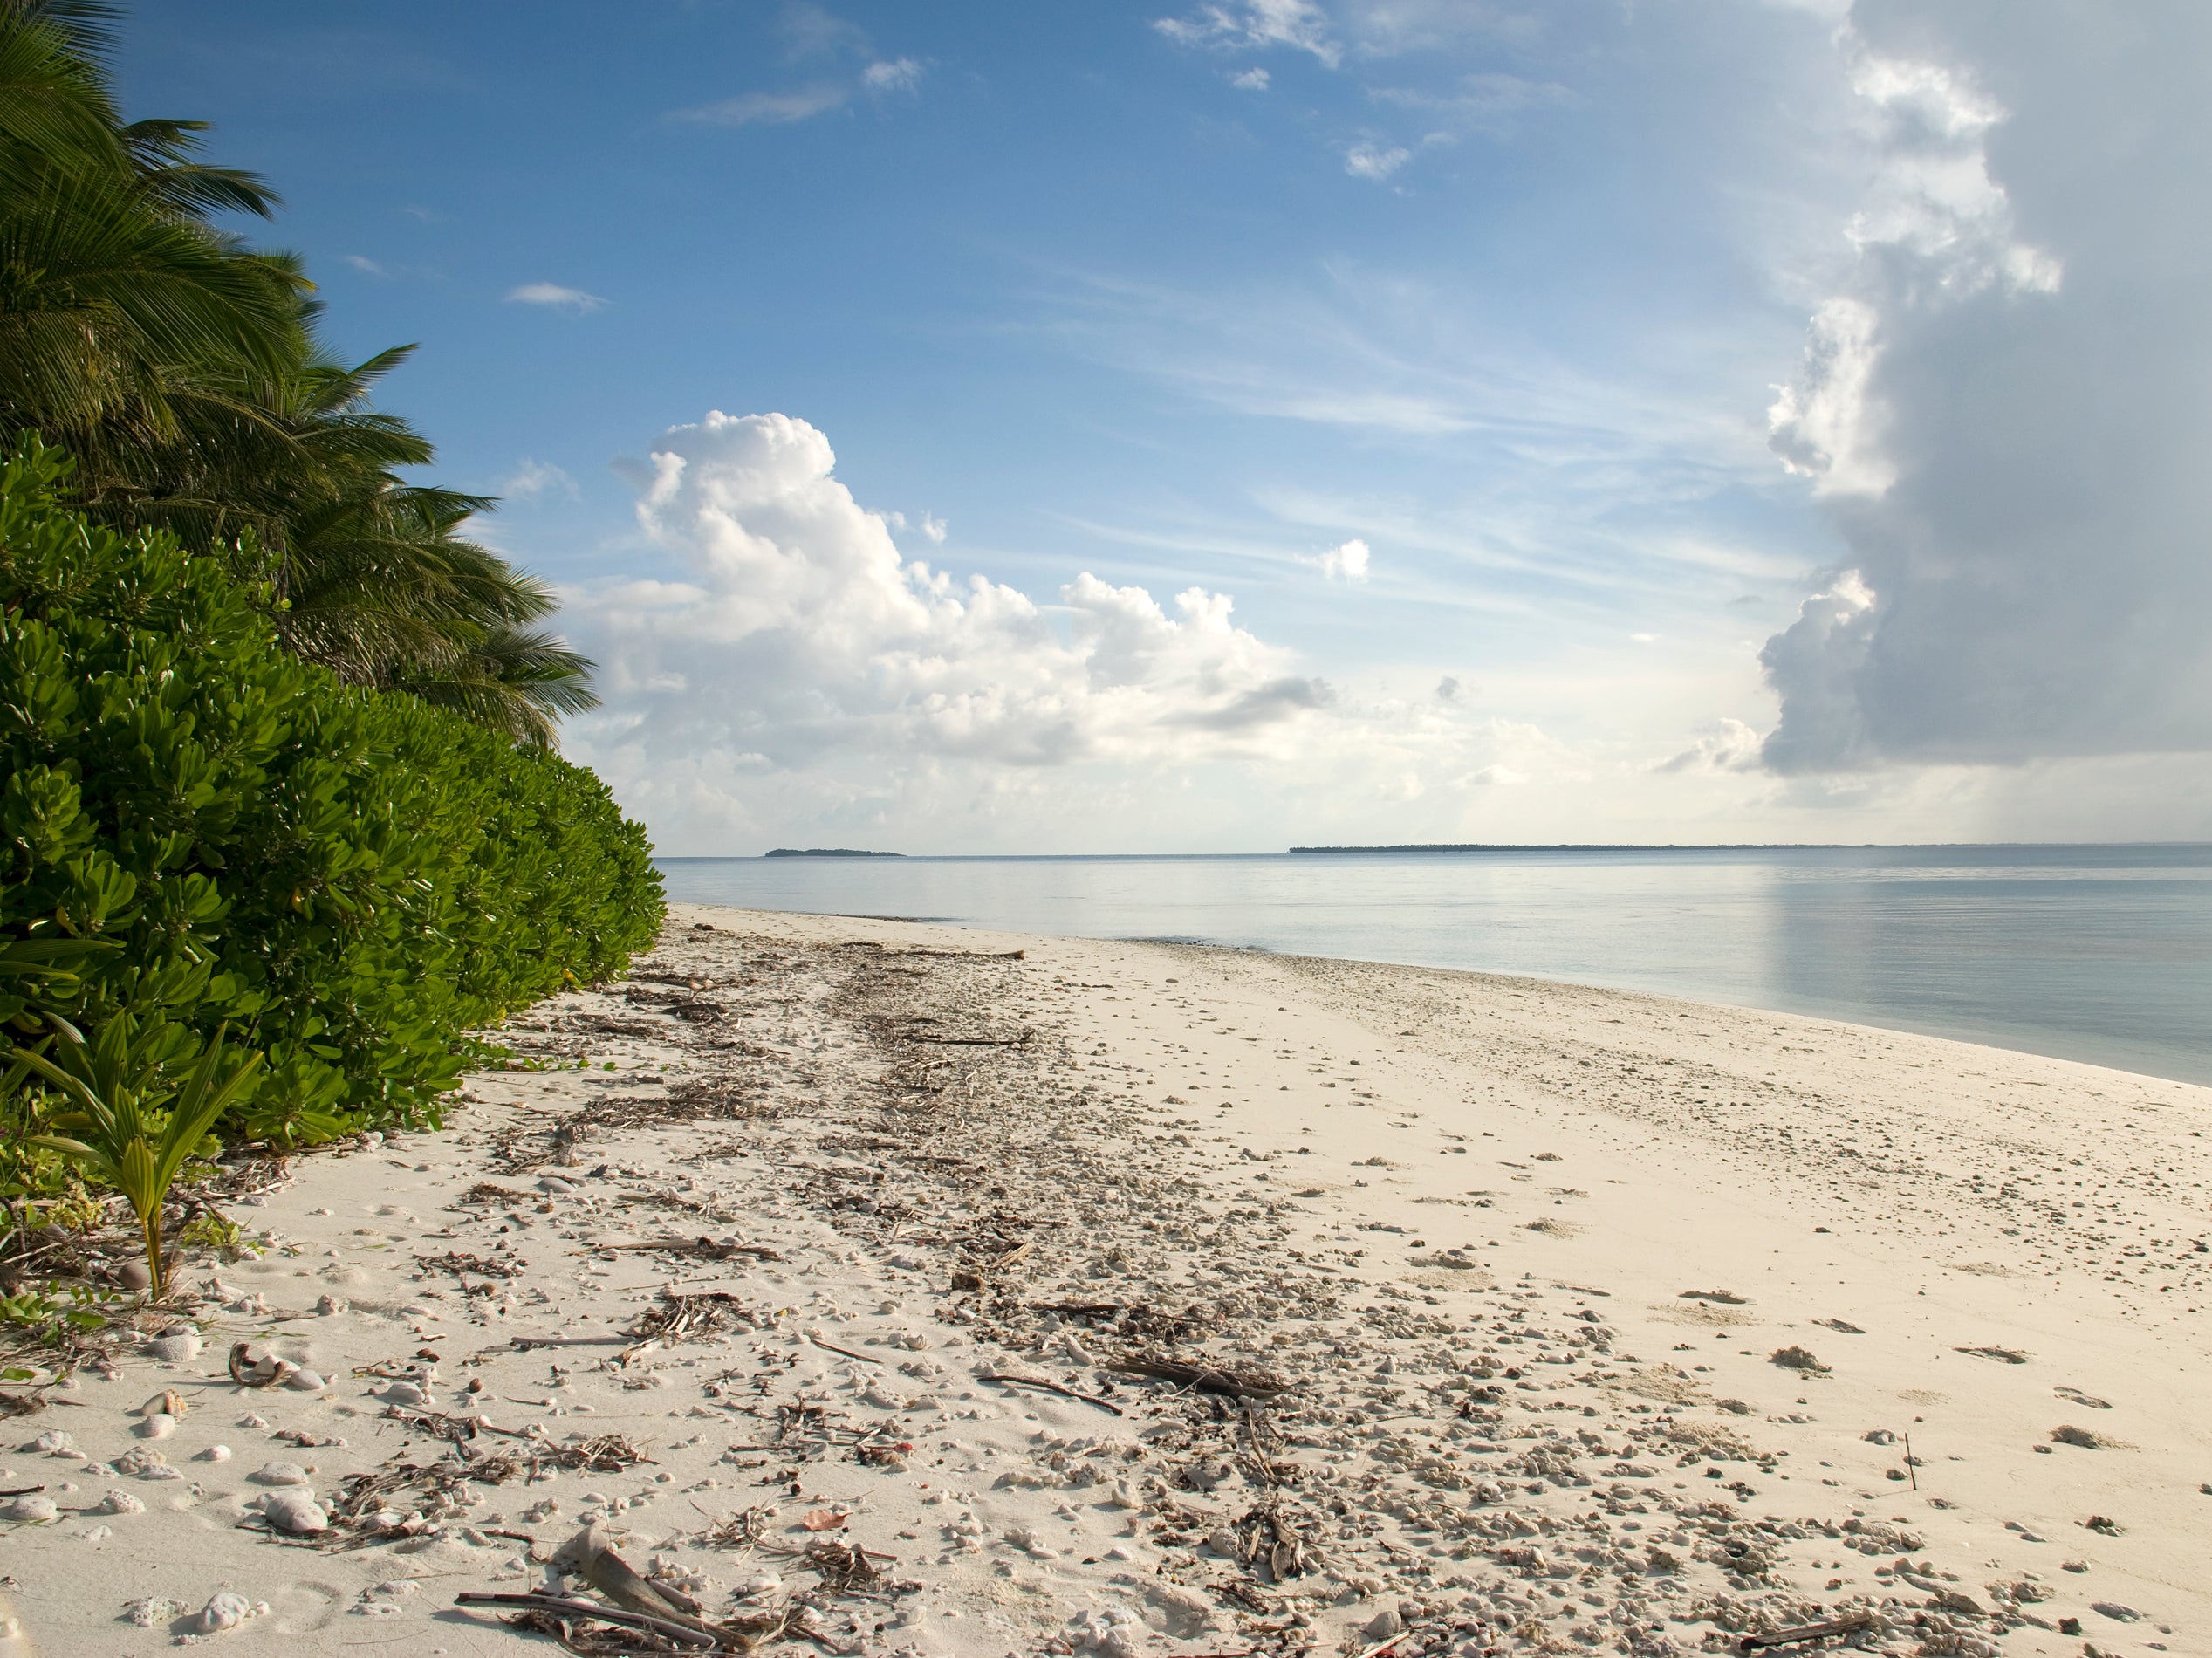 Pristine sands and waters of the Chagos Archipelago are part of a 640,000 sq km protected conservation zone